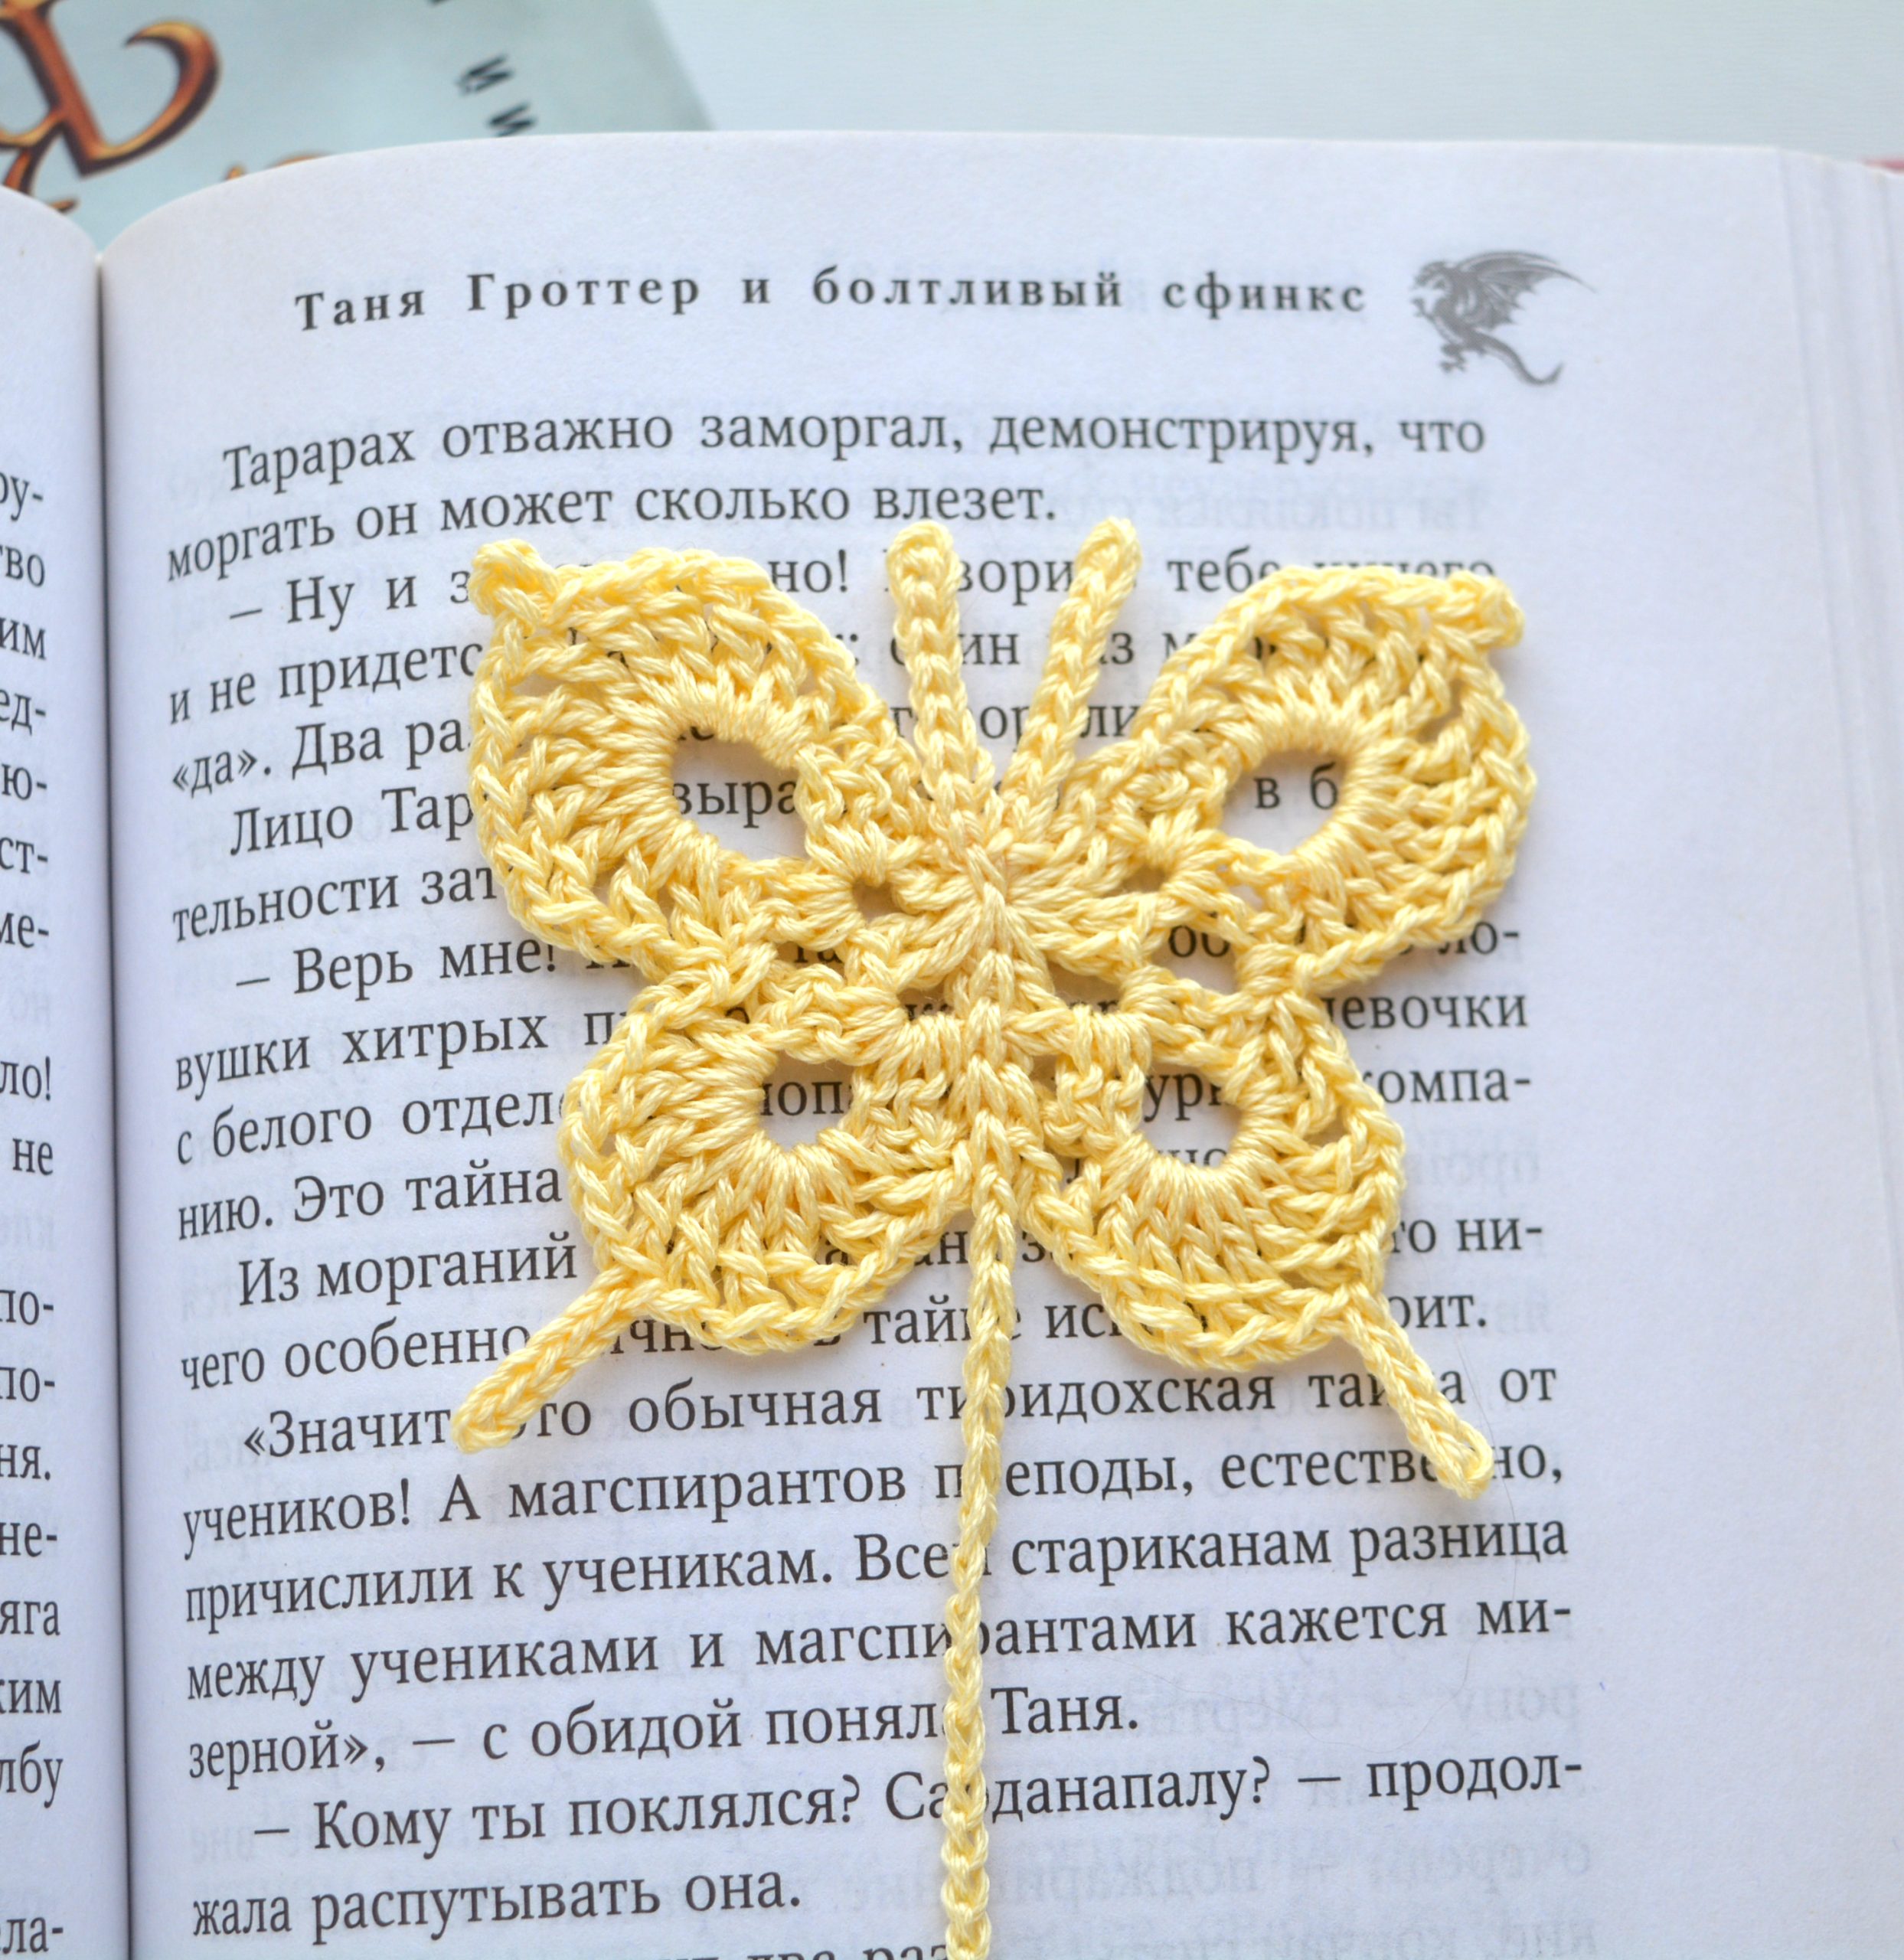 Crochet book (CROCHET WALL HANGING PATTERNS INCLUDED) - DailyDoll Shop